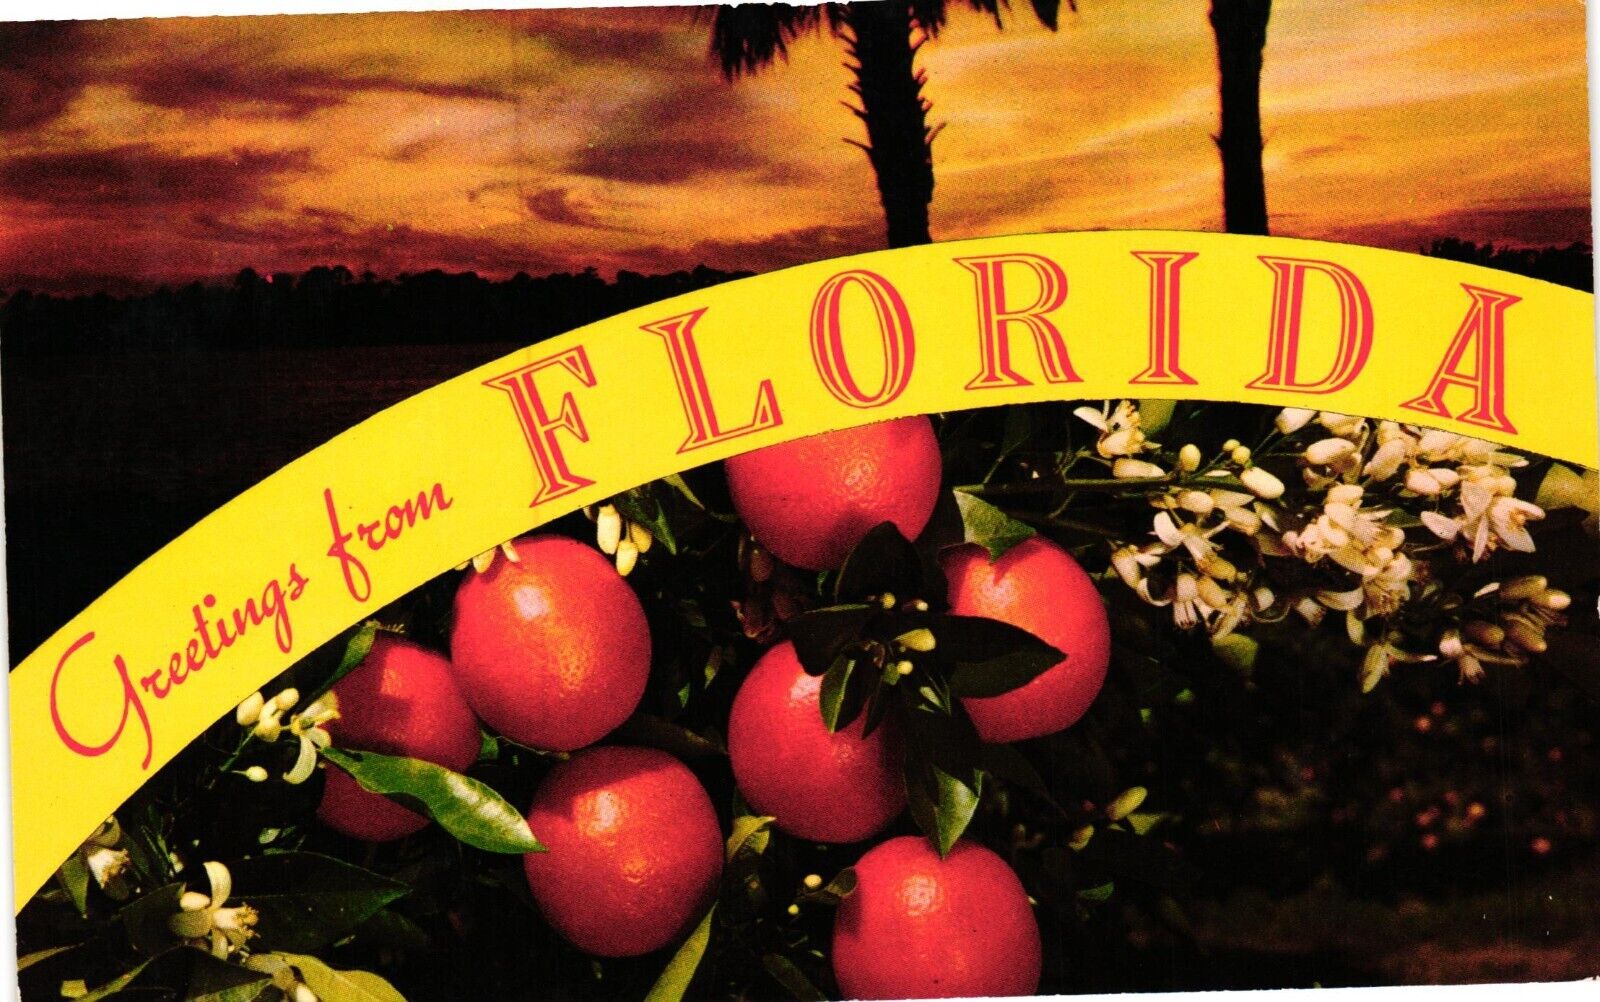 Vintage Postcard - Greetings From Florida Bright Oranges And Sunset Un-Posted